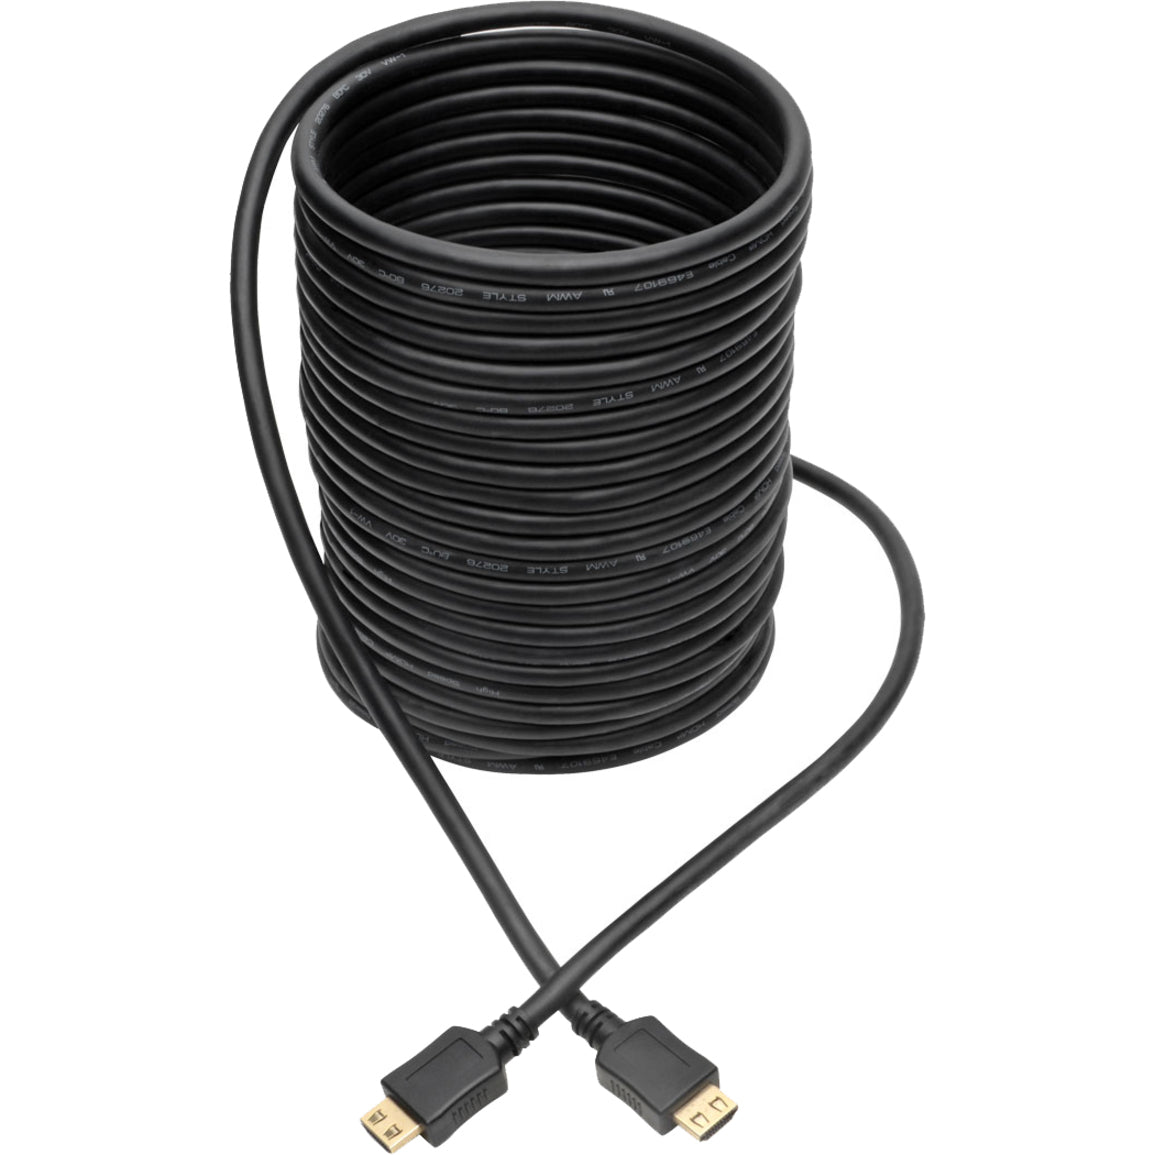 Tripp Lite P568-035-BK-GRP High-Speed HDMI Cable, 35 ft., with Gripping Connectors, Black